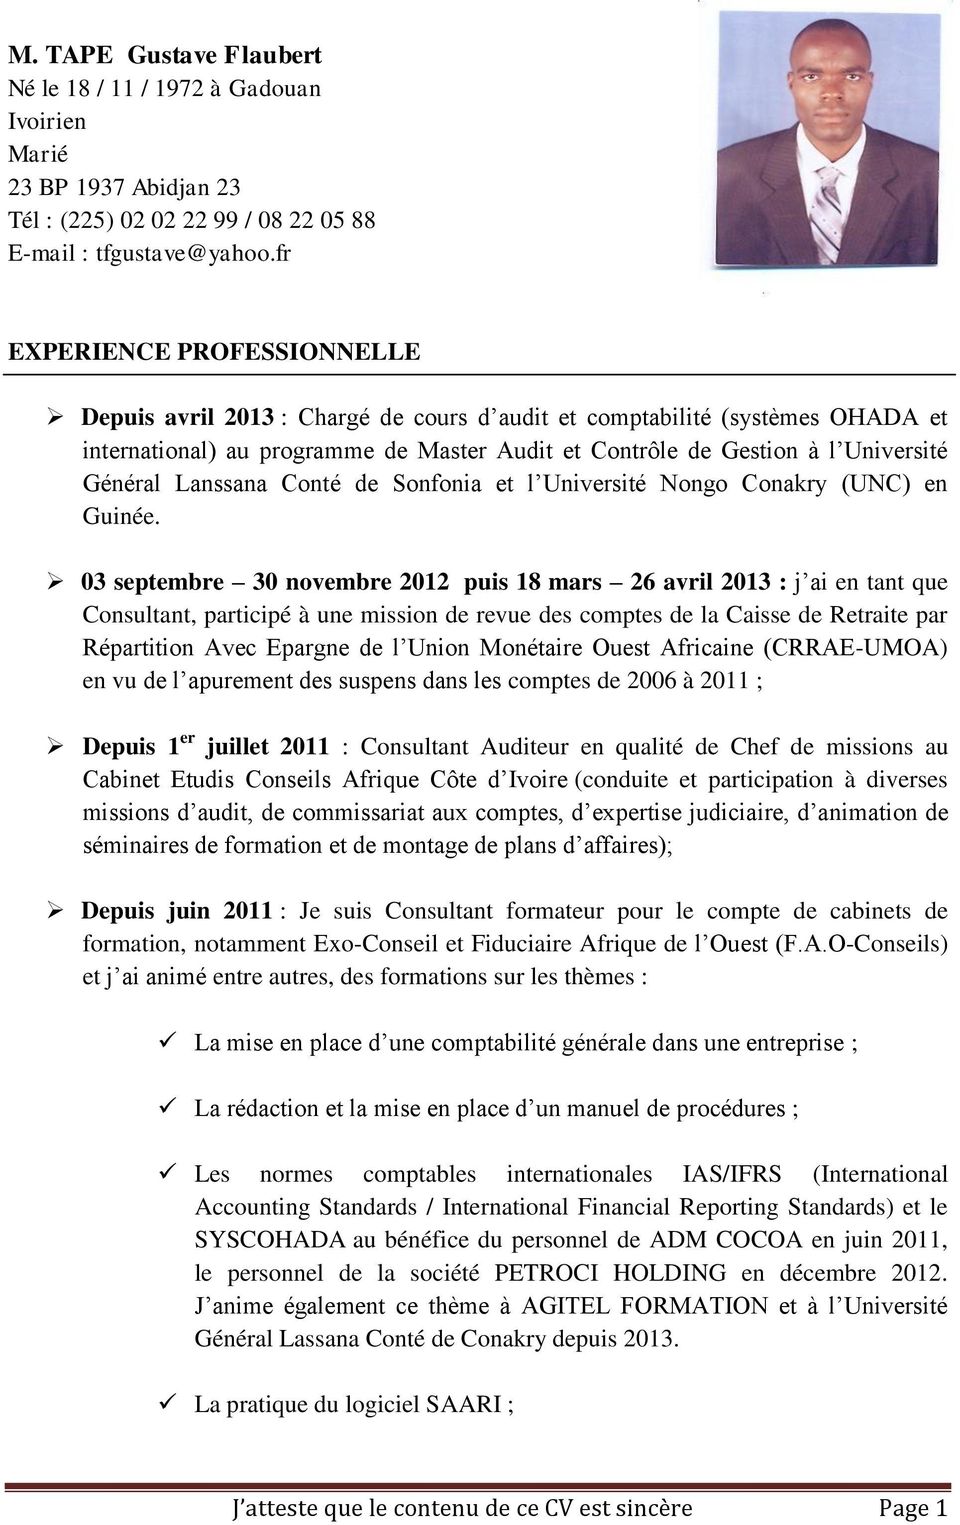 experience professionnelle